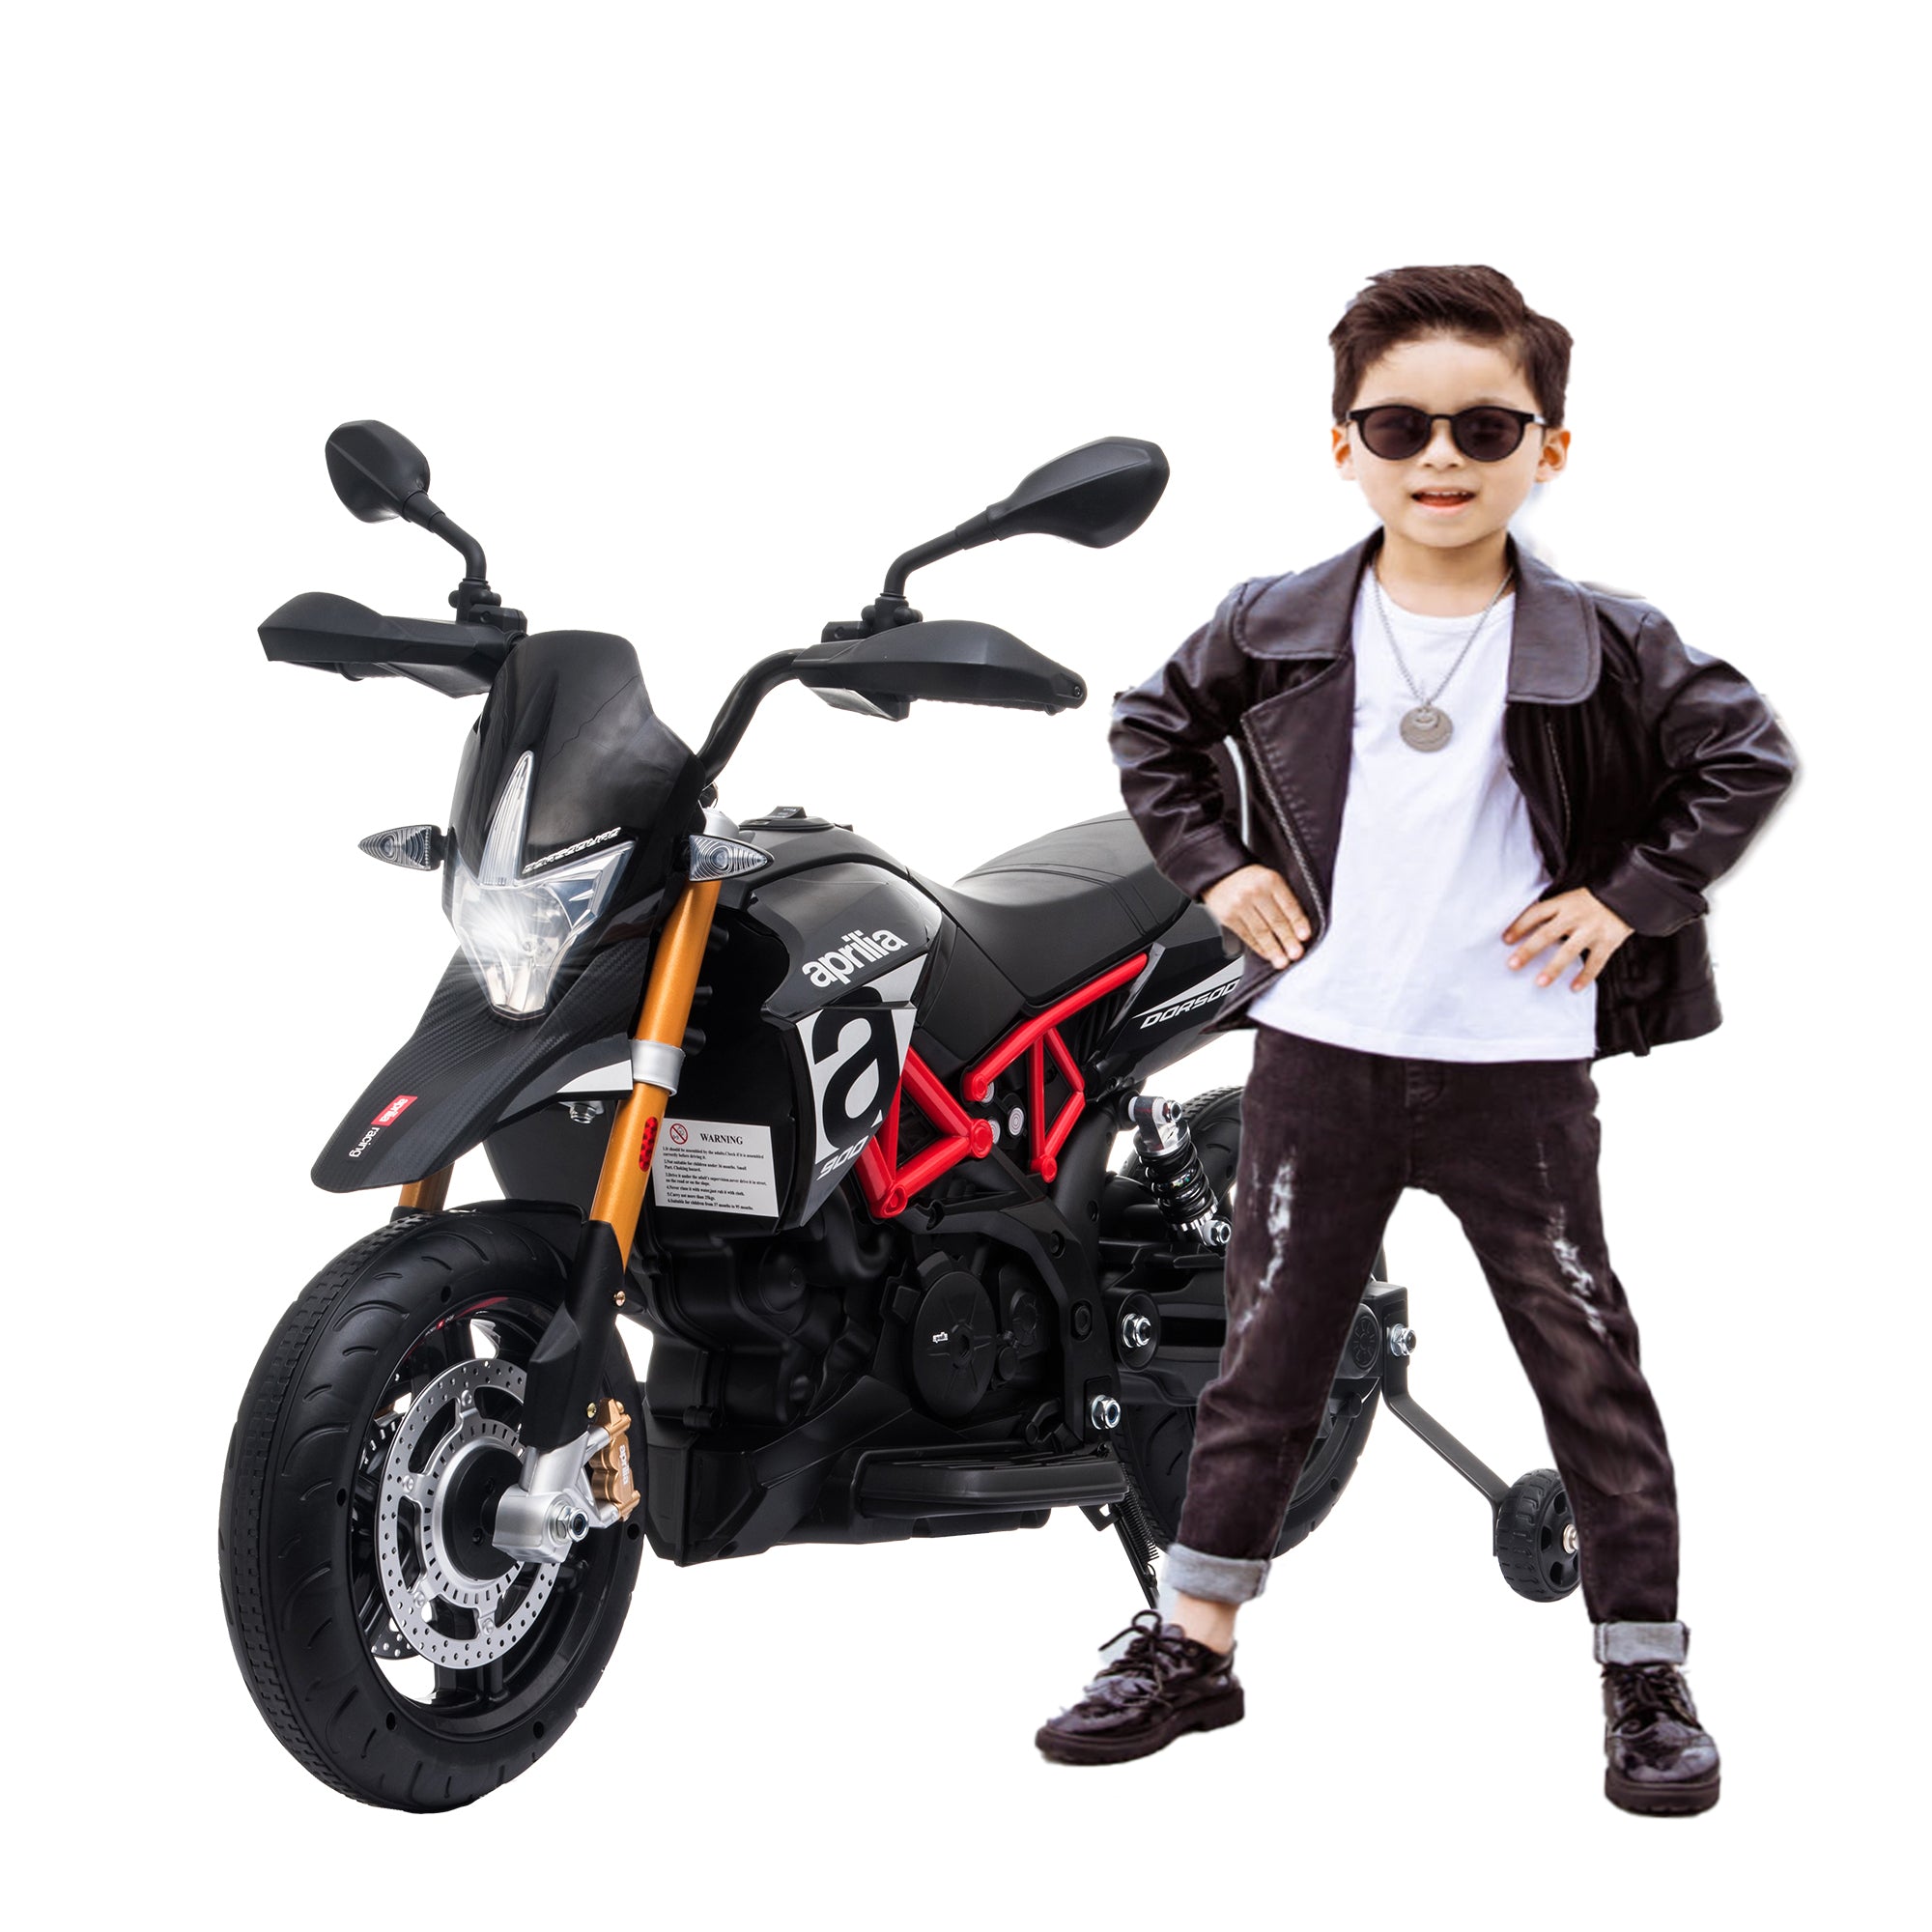 🆓🚛 Licensed Aprilia Electric Motorcycle, 12V Kids Motorcycle, Ride On Toy W/Training Wheels, Spring Suspension, Led Lights, Sounds & Music, Mp3, Battery Powered Dirt Bike for Boys & Girls, Black